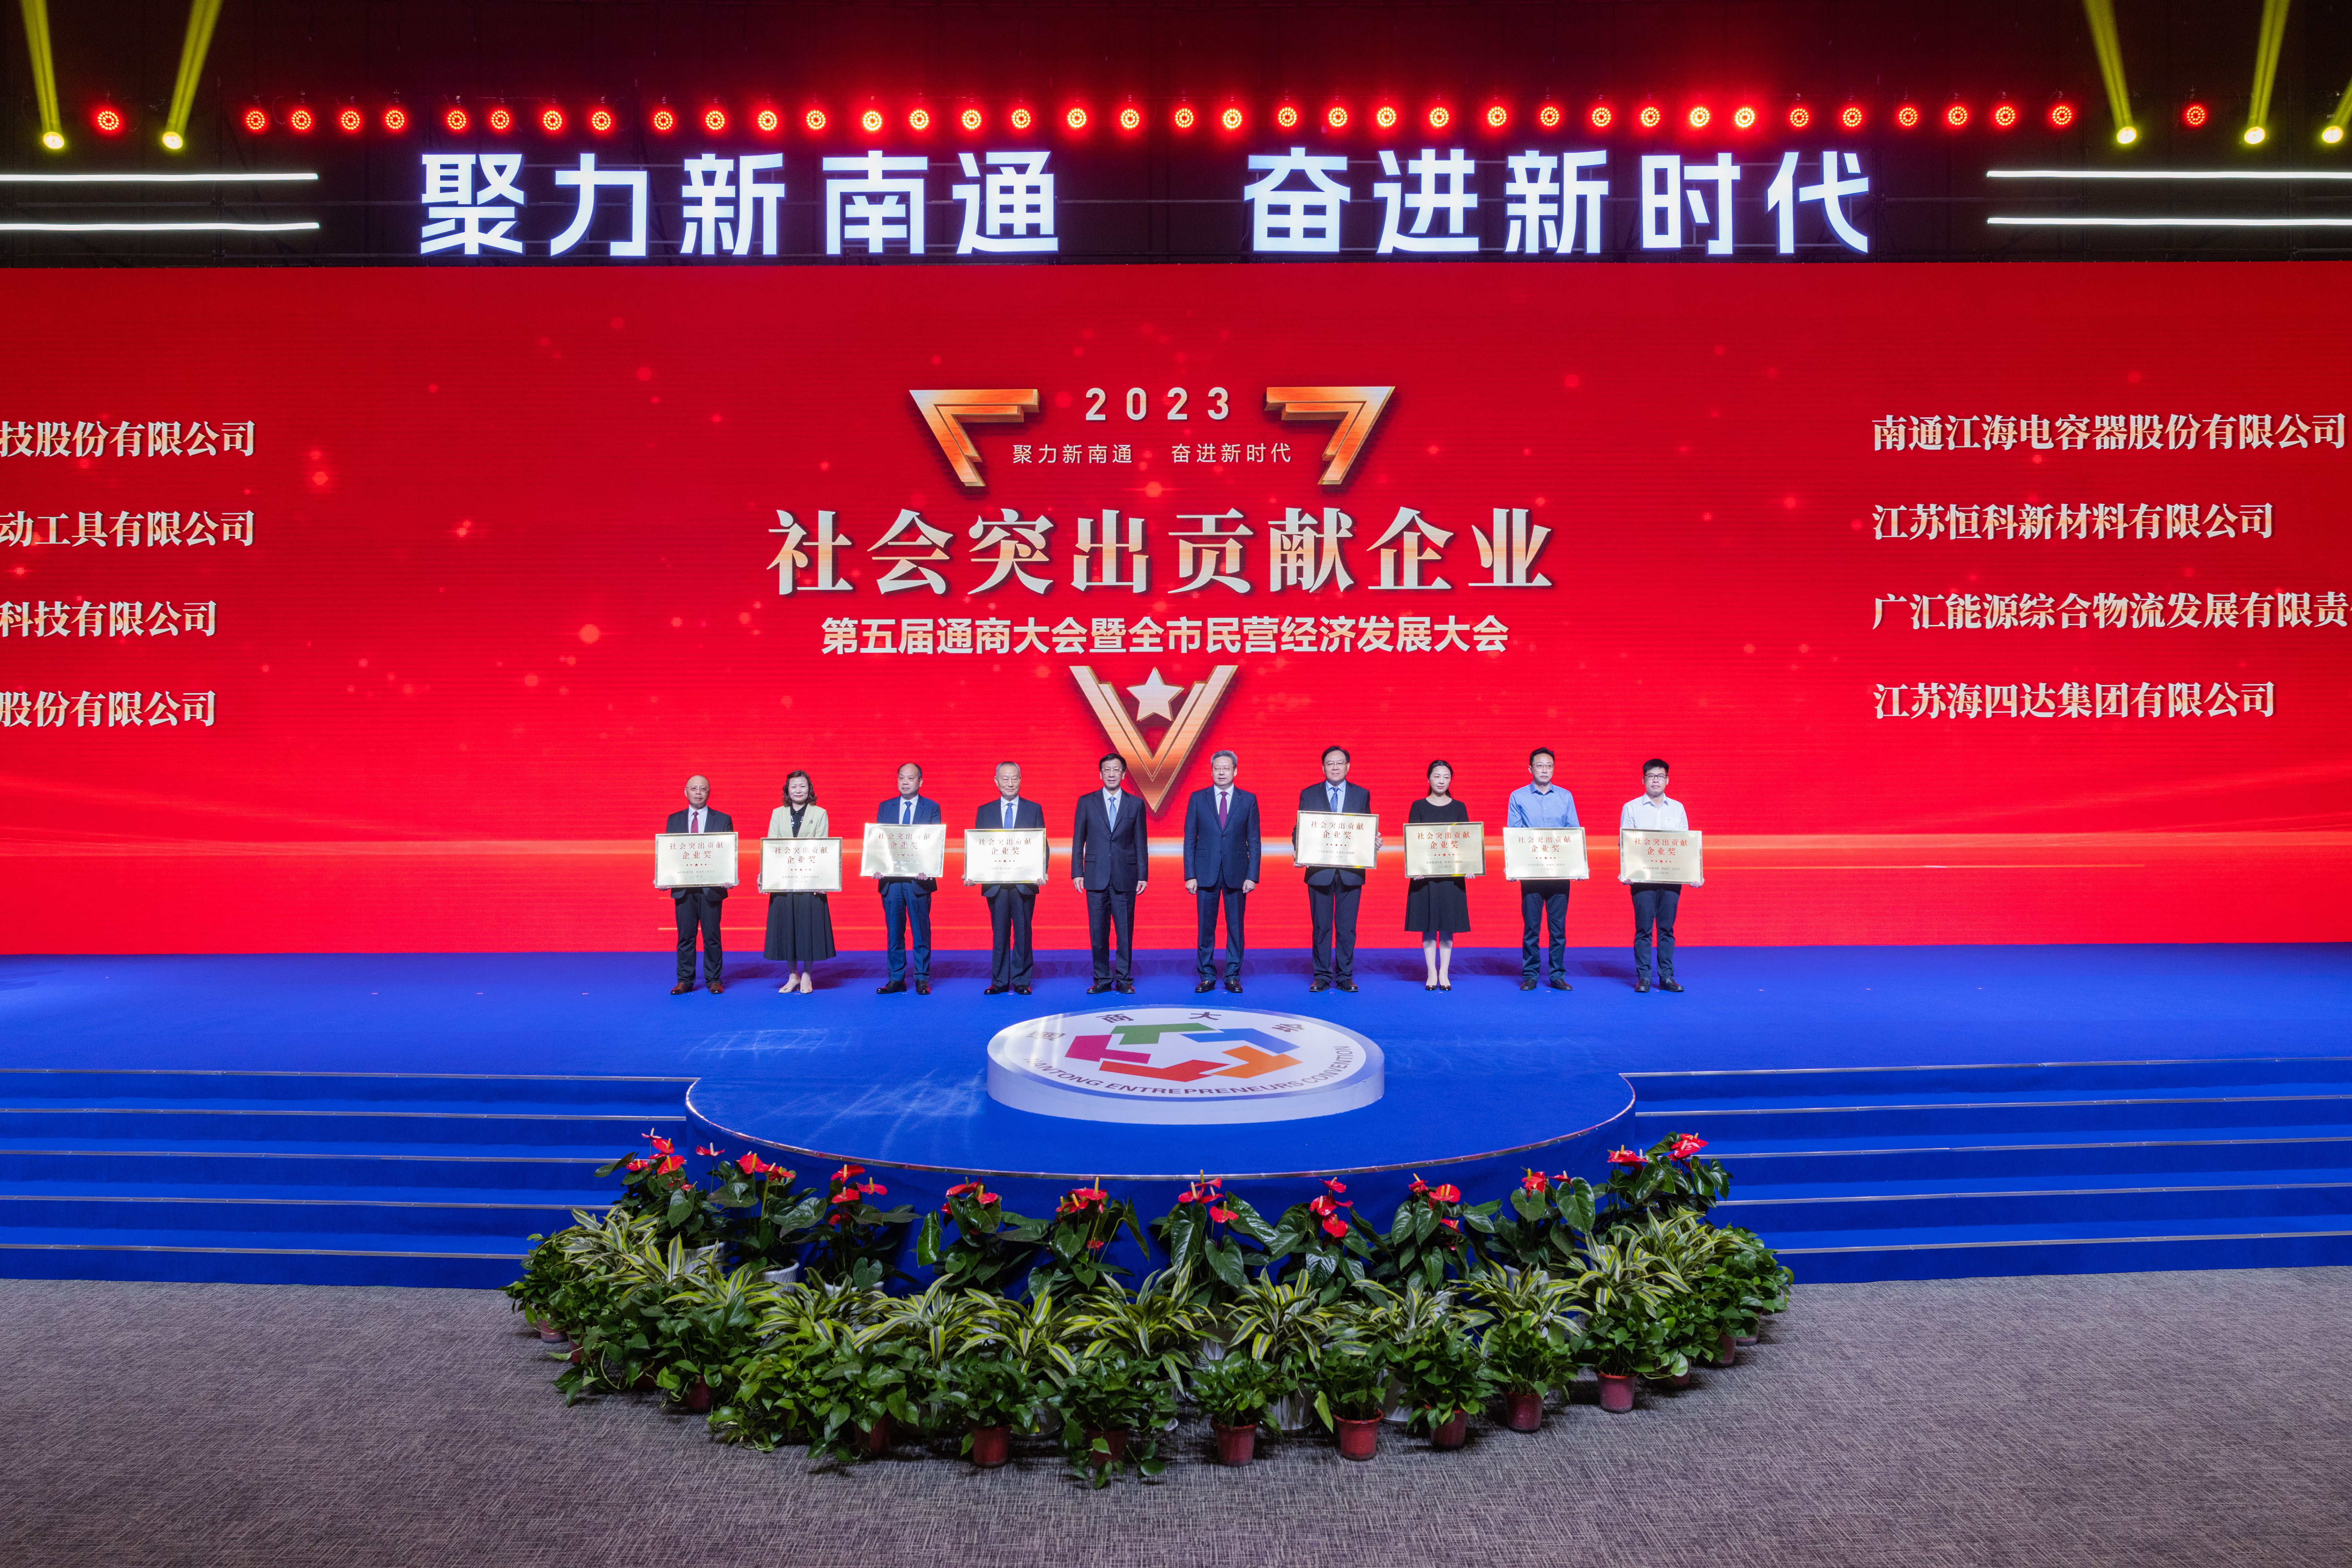 DongCheng Company Wins“Enterprise Award for Outstanding Social Contributions”